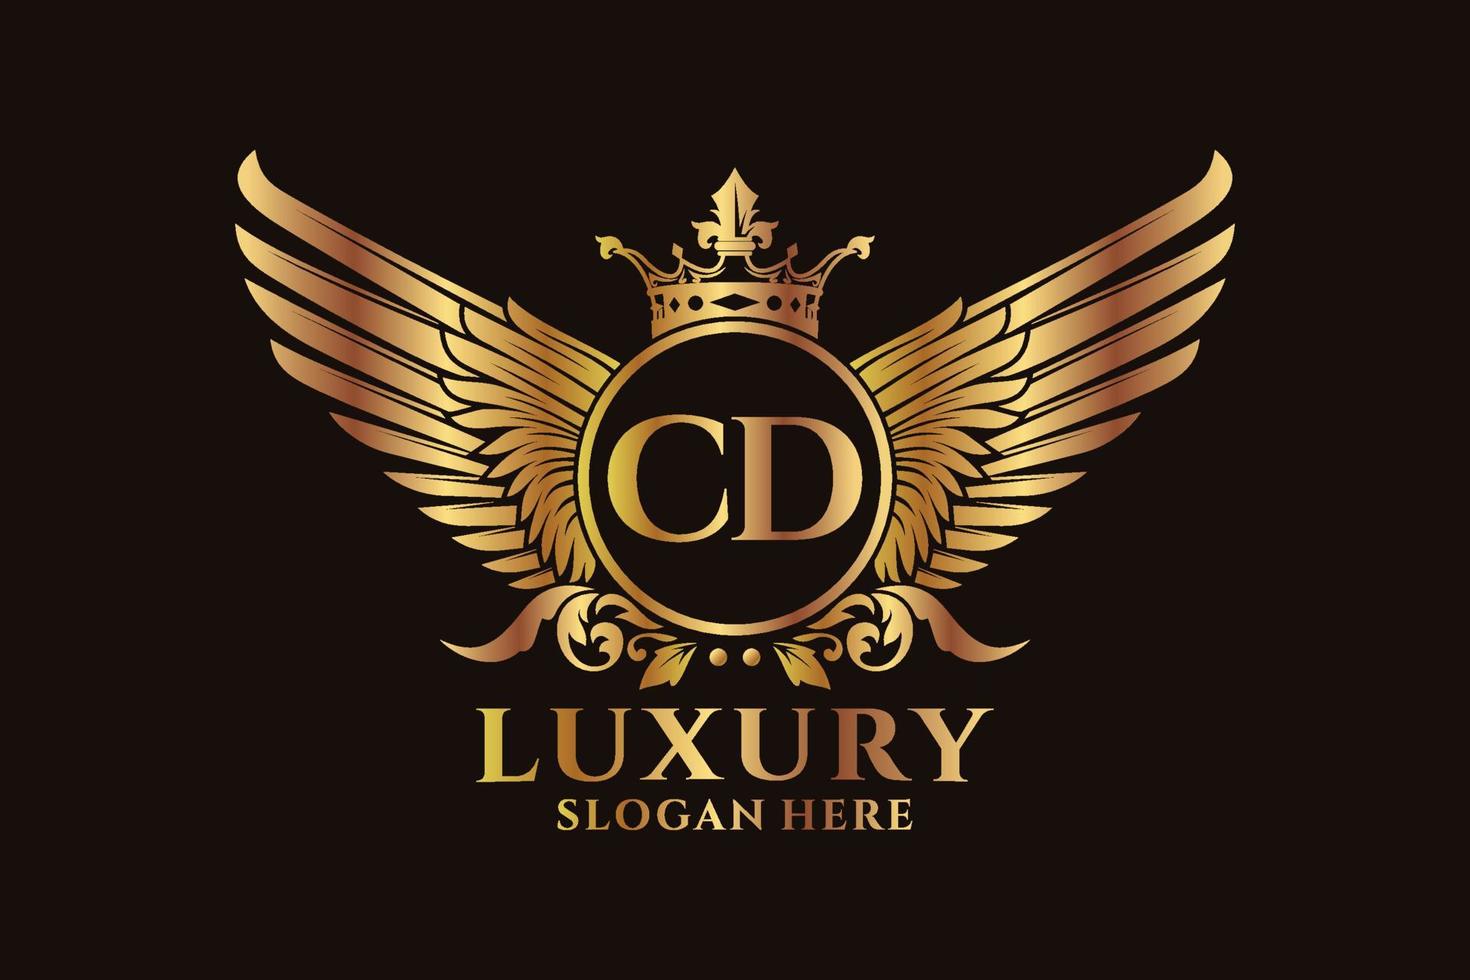 Luxury royal wing Letter CD crest Gold color Logo vector, Victory logo, crest logo, wing logo, vector logo template.